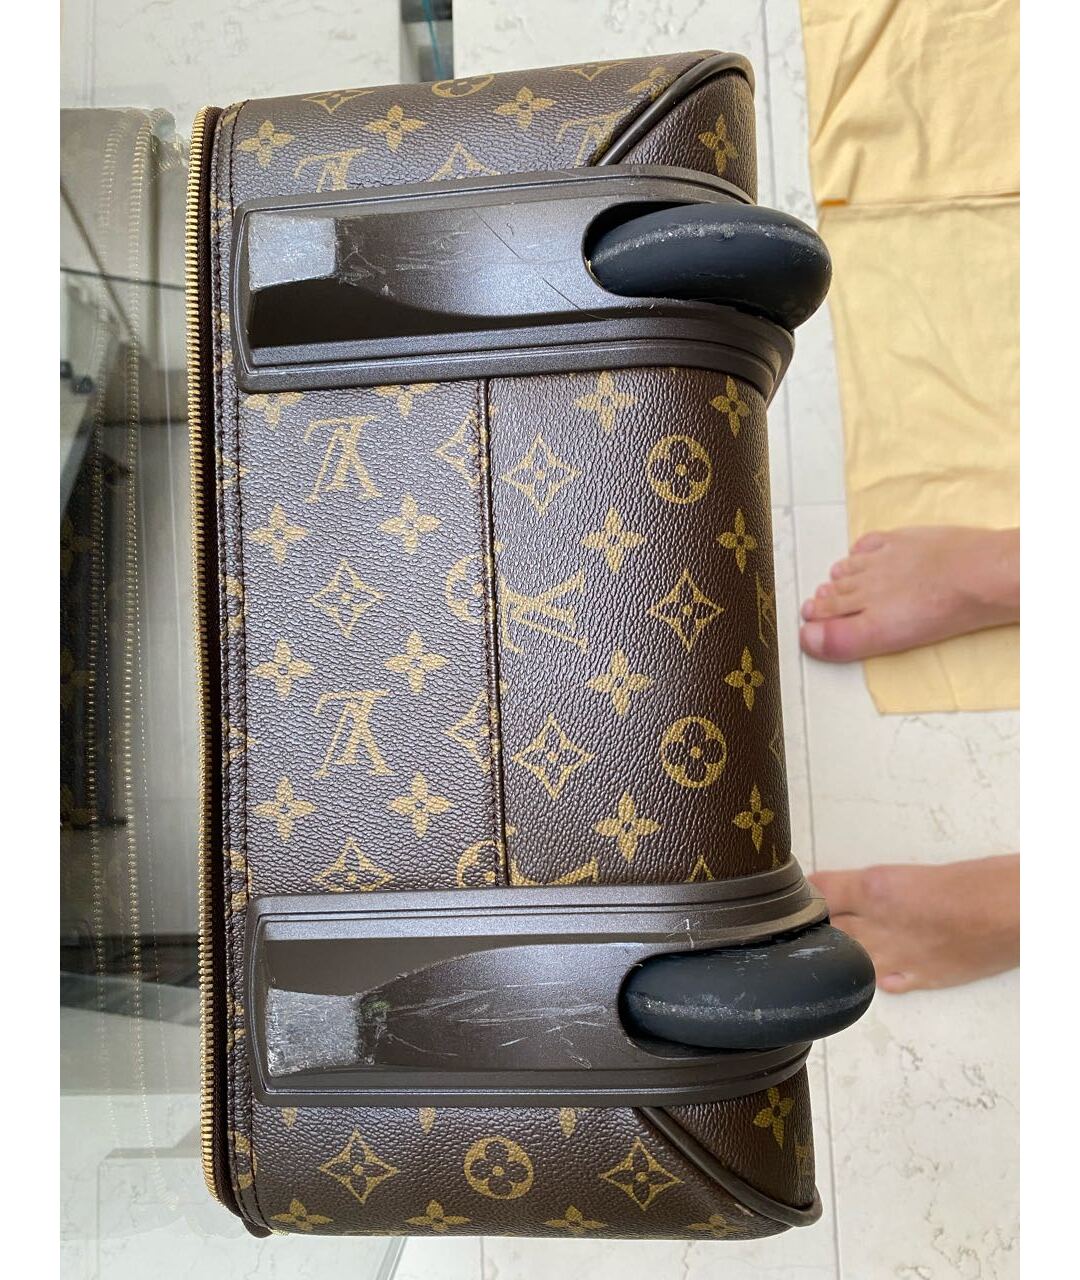 caja louis vuitton 28,5x36x15 cm - Buy Other second-hand articles on  todocoleccion